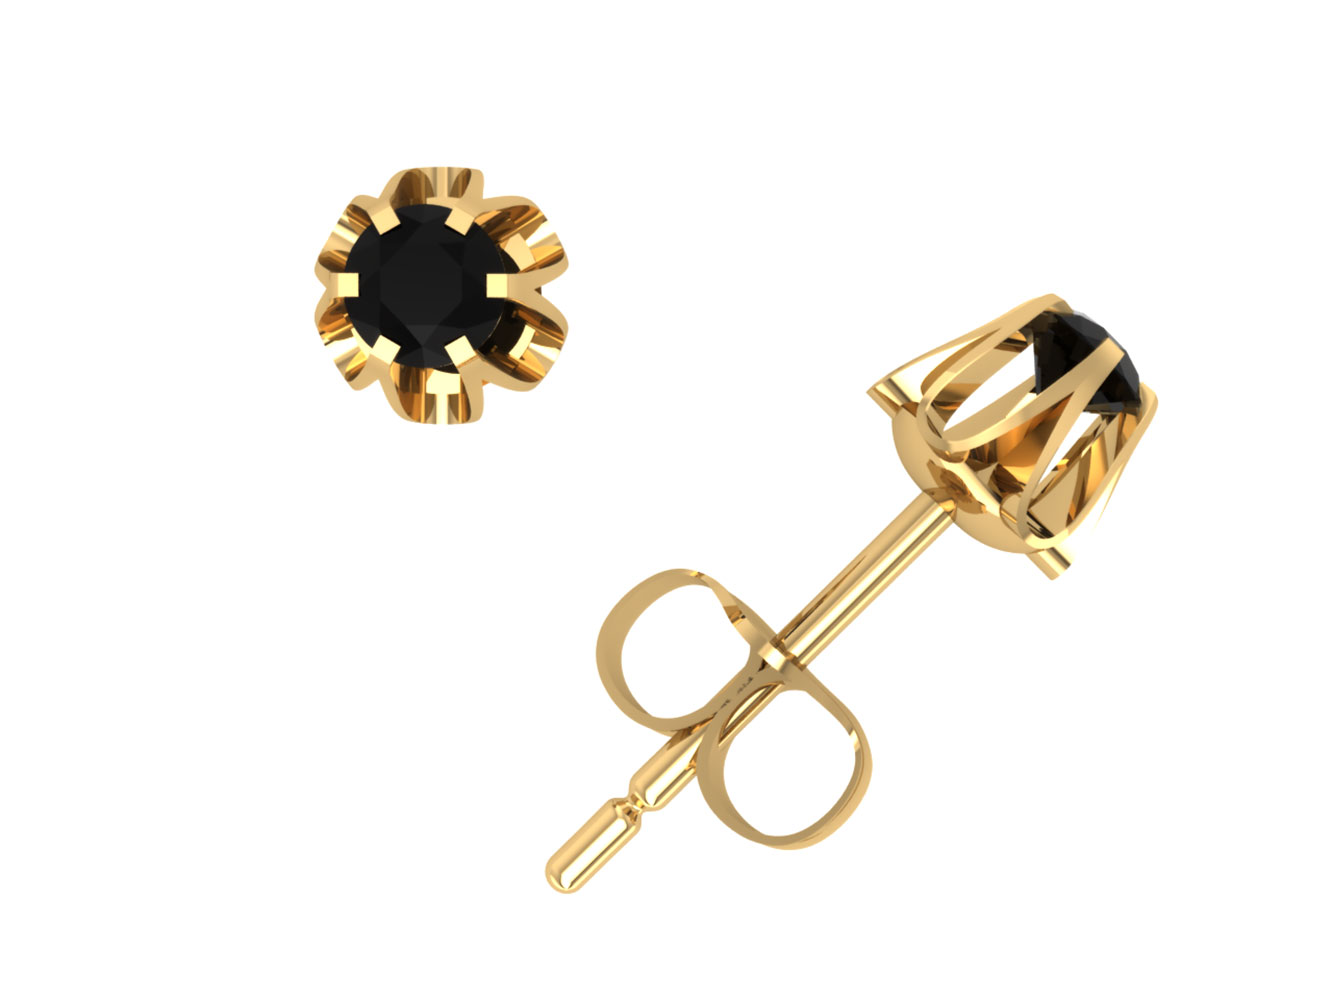 Jewel We Sell 1/10Ct Round Cut Black Diamond Buttercup Stud Earrings 14k White or Yellow Gold Prong Set I1